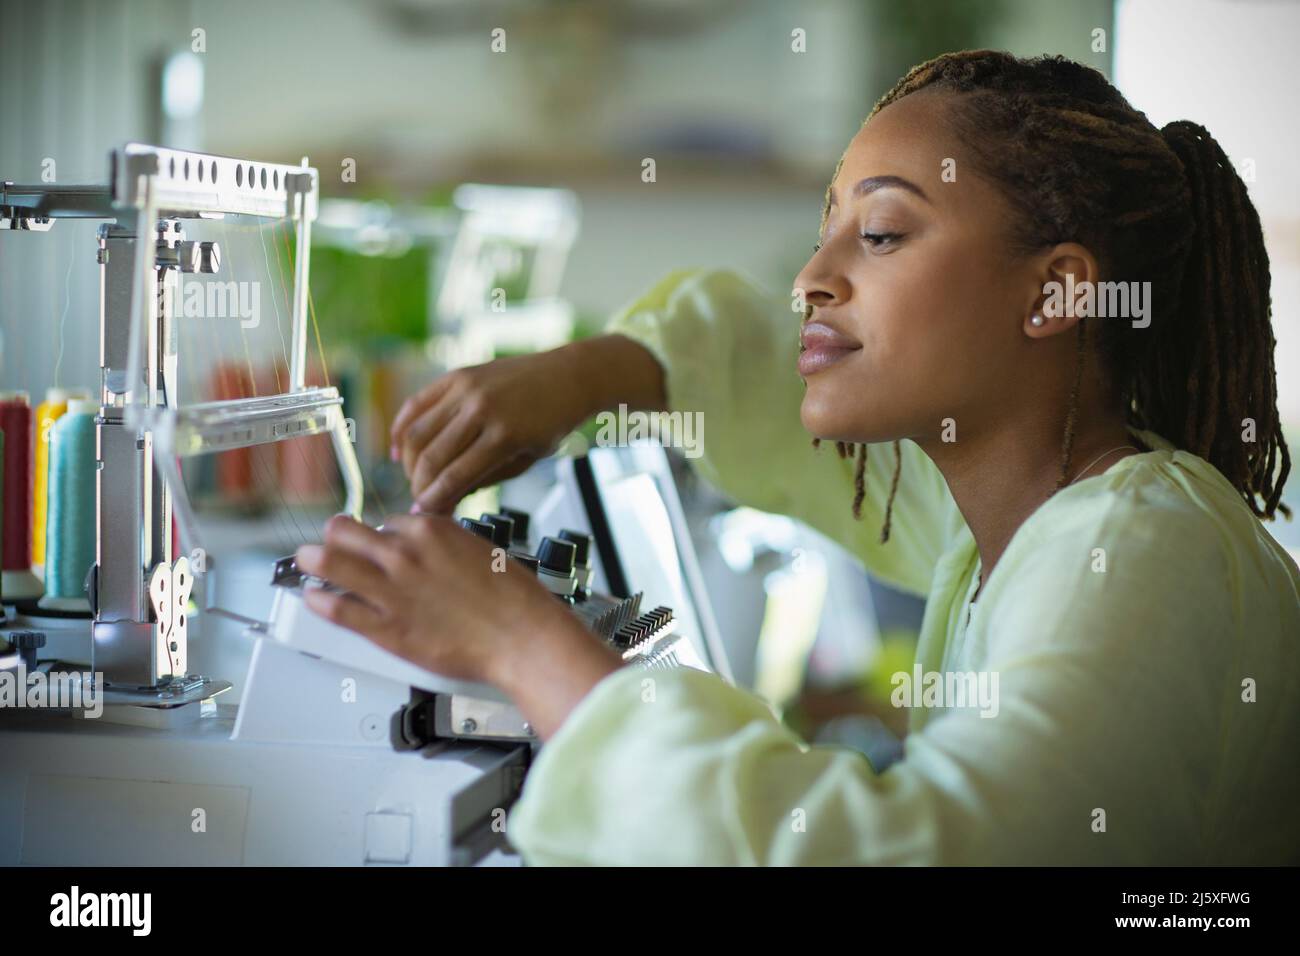 Young female seamstress at sewing machine Stock Photo